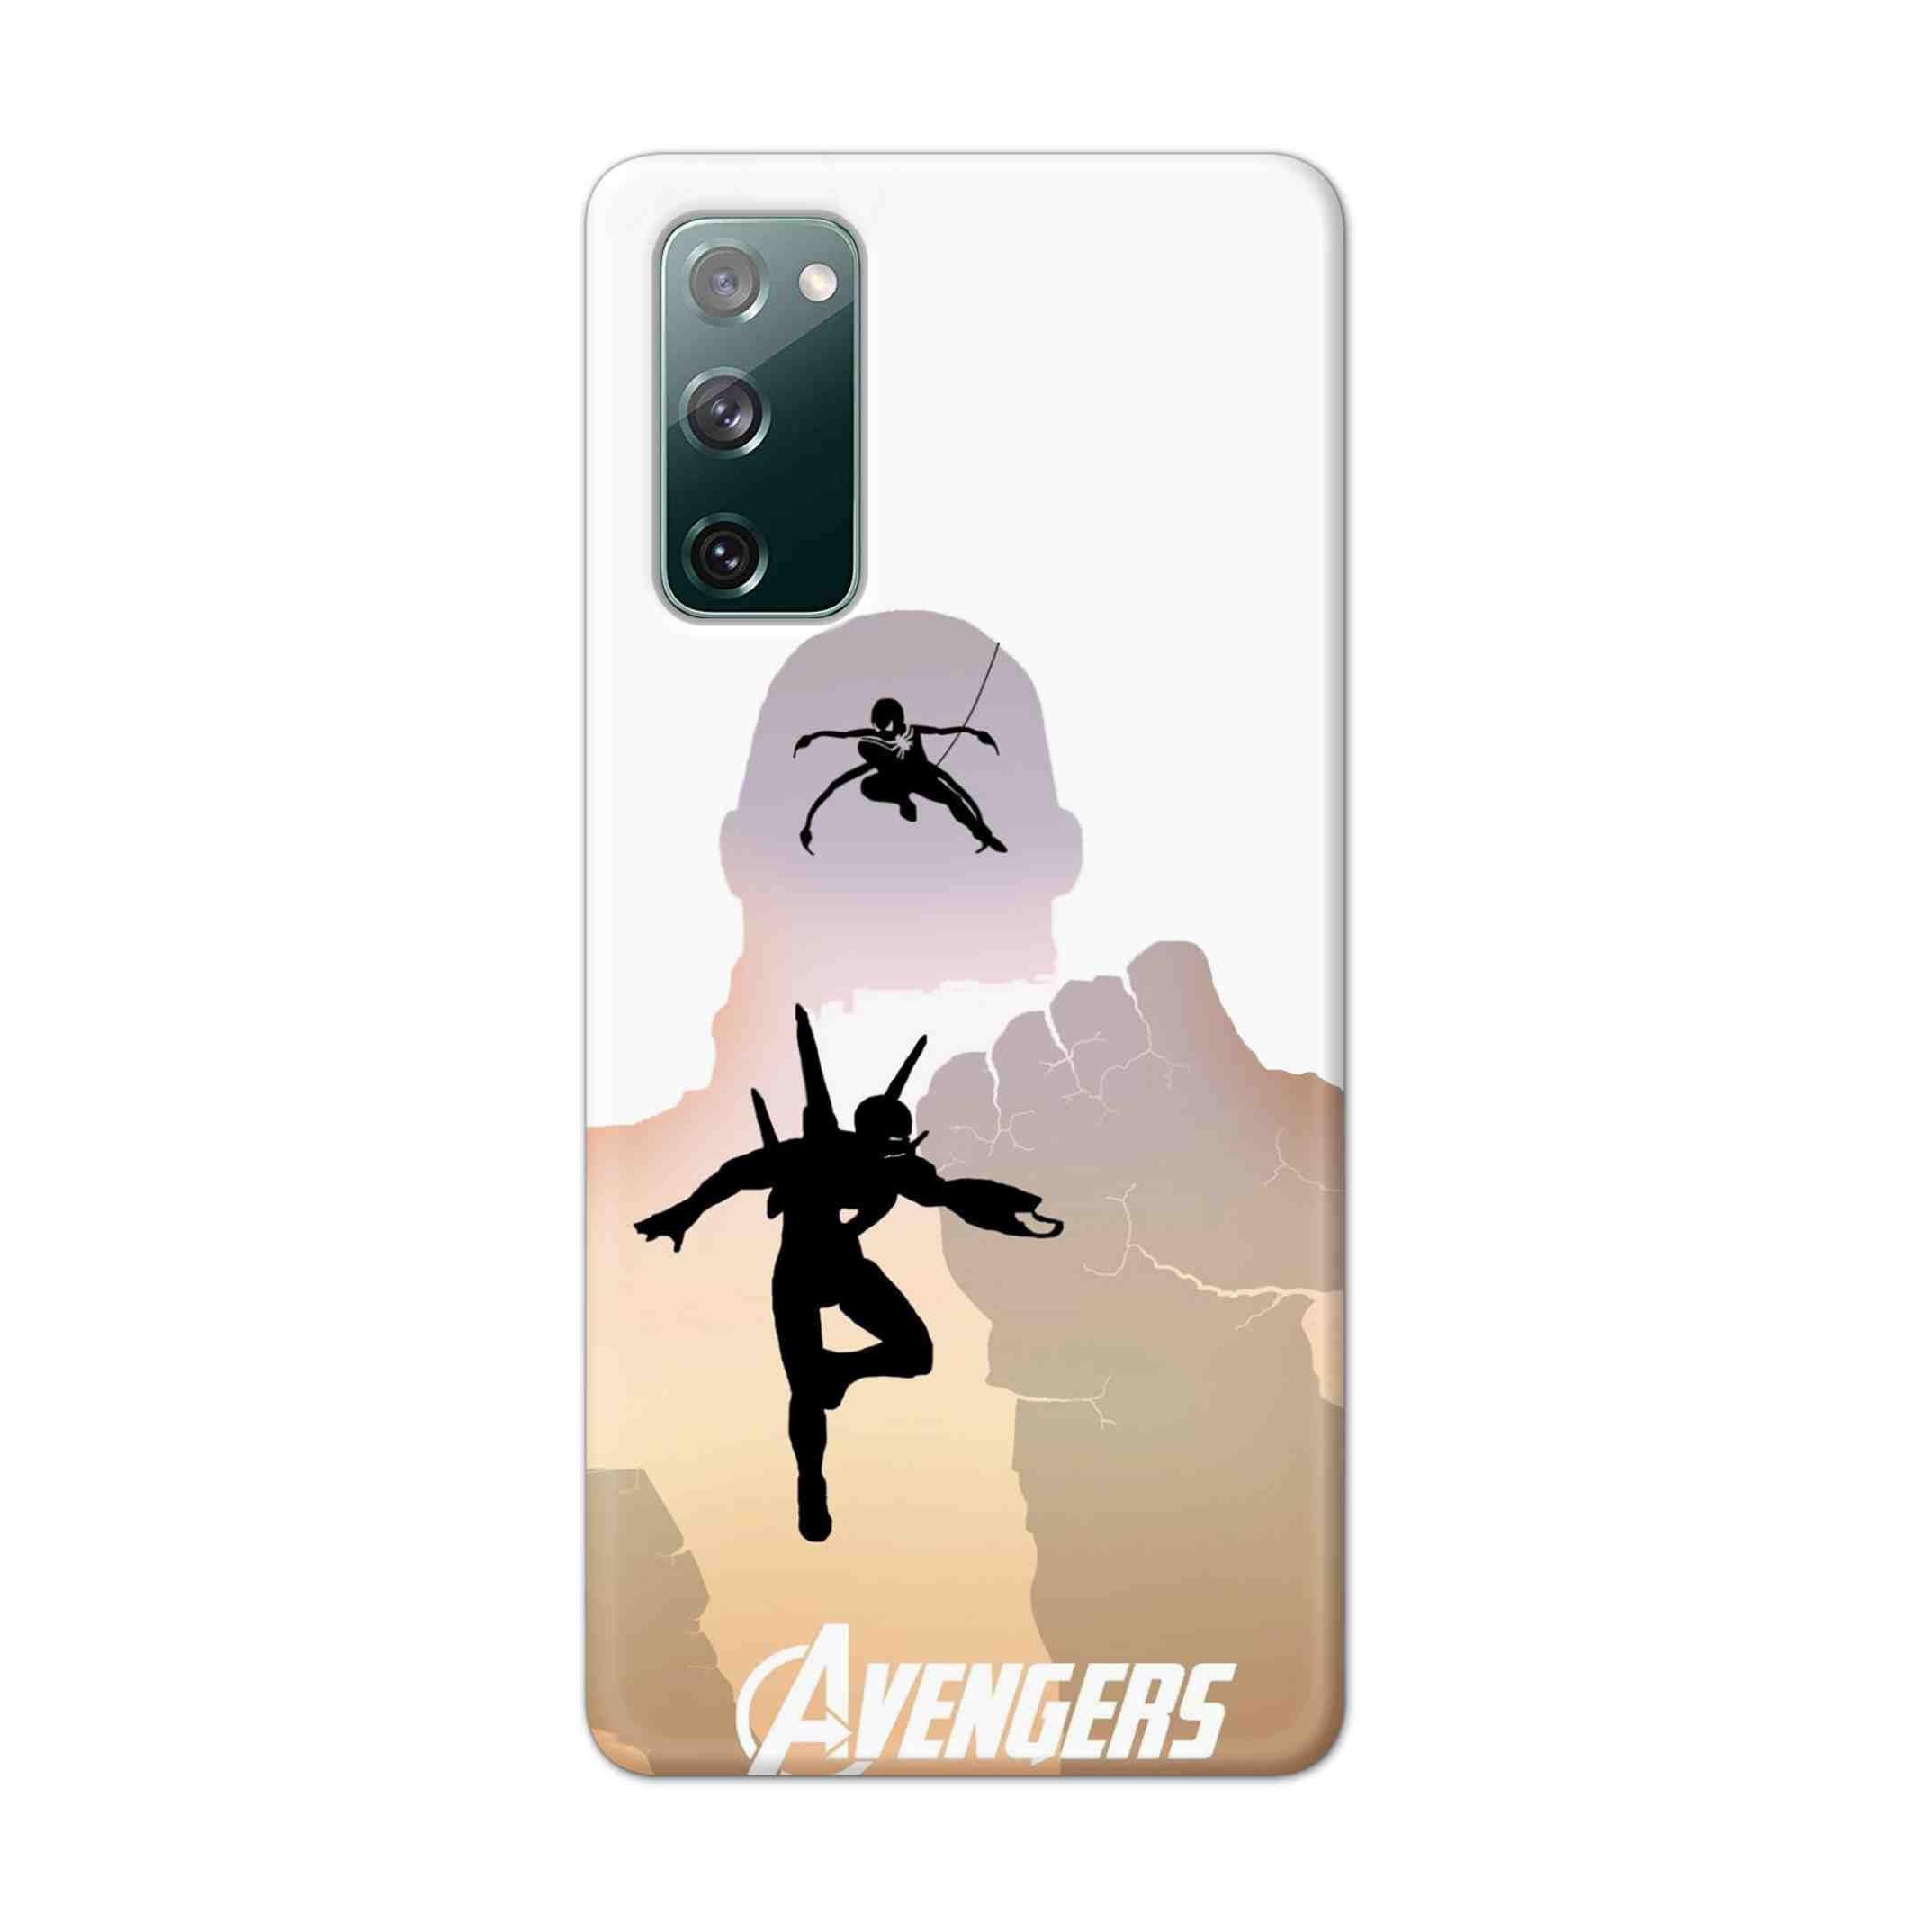 Buy Iron Man Vs Spiderman Hard Back Mobile Phone Case Cover For Samsung Galaxy S20 FE Online